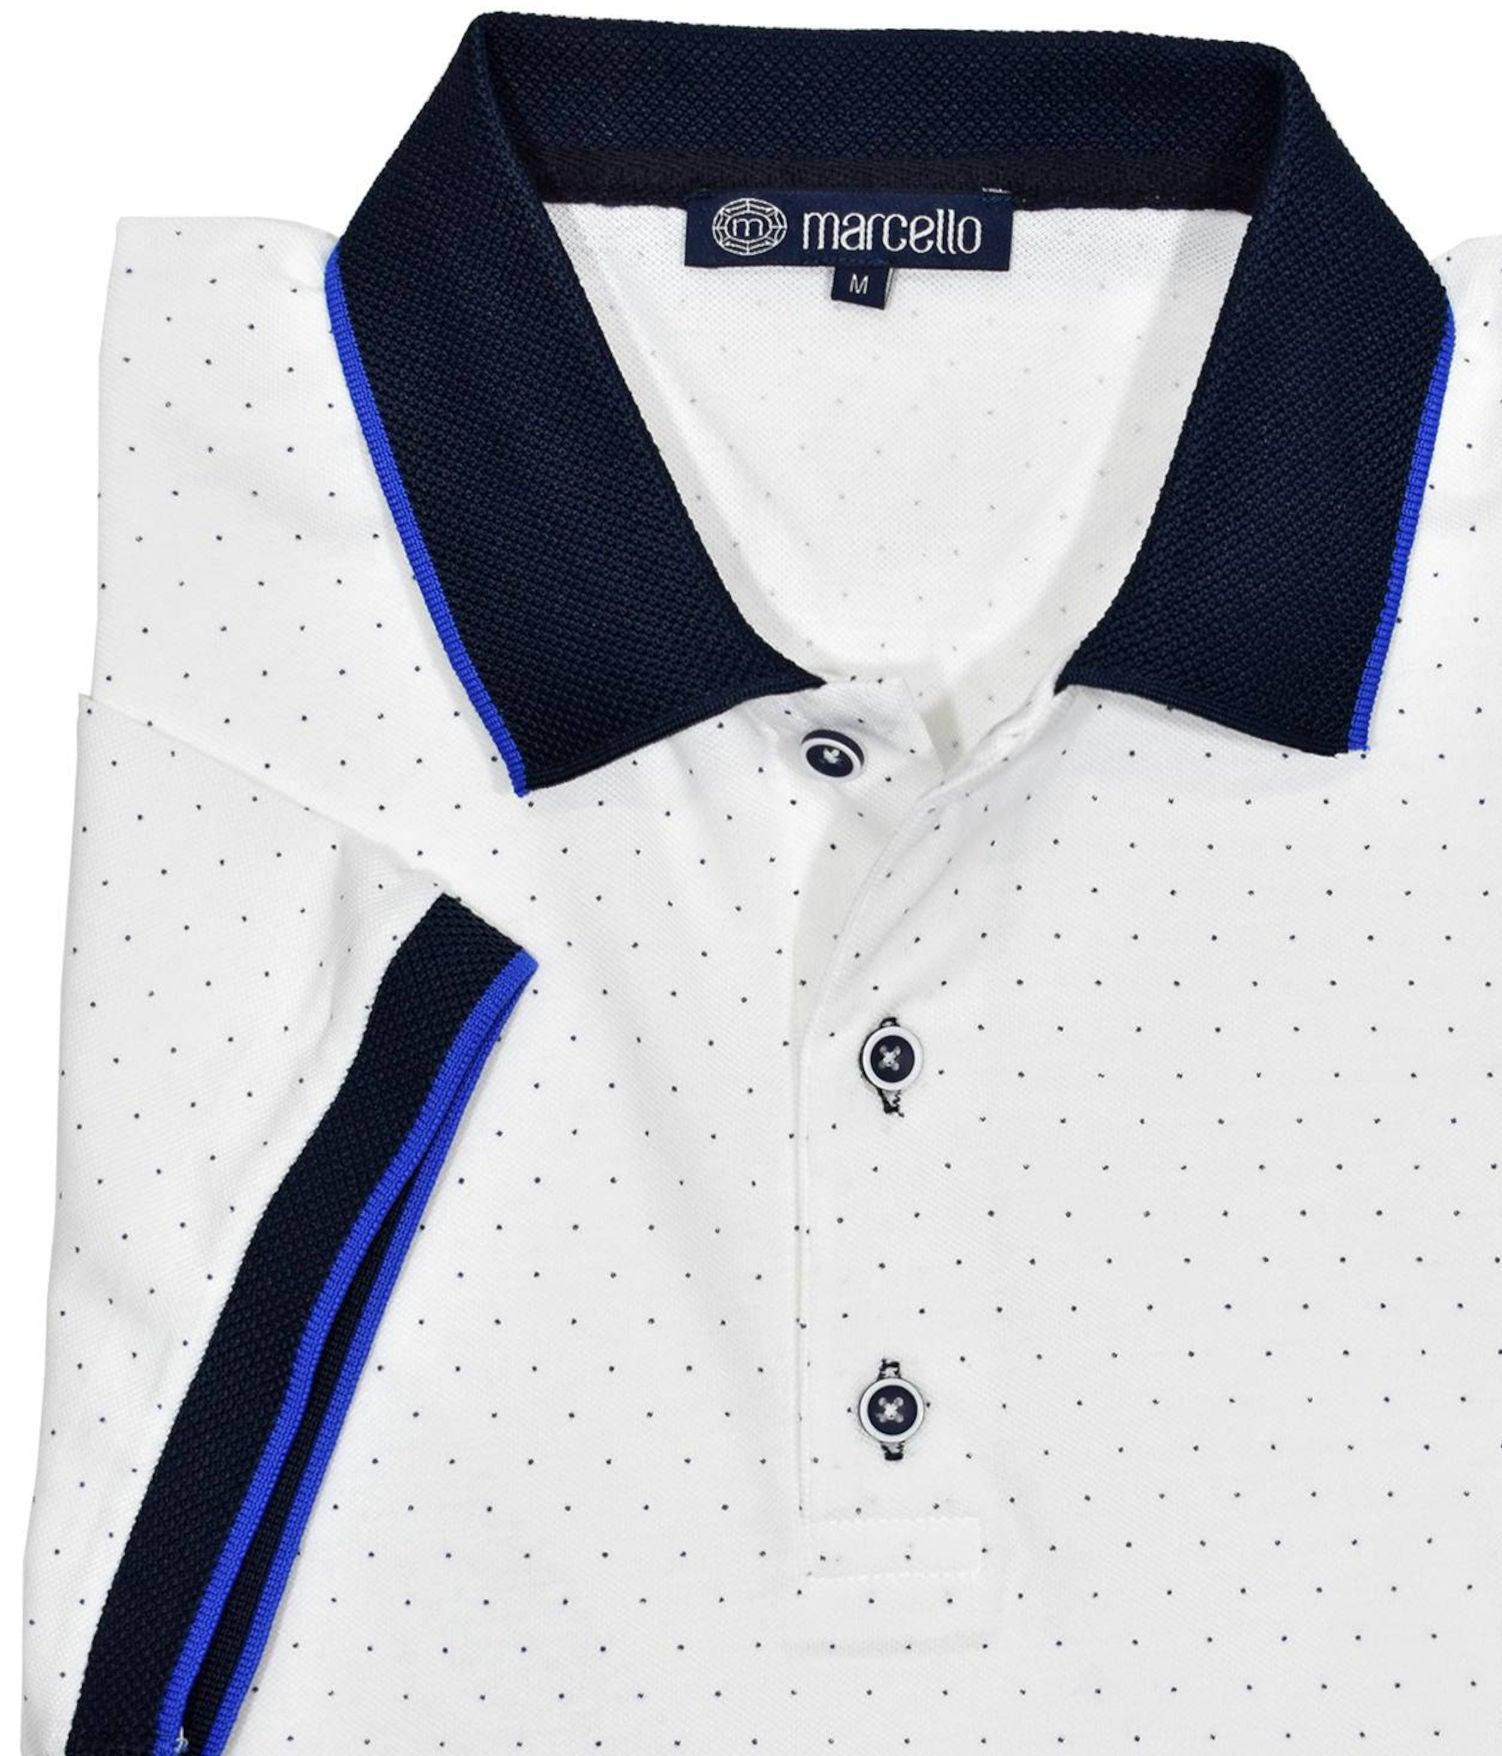 The Wellington polo sports a light weight and soft baby pique fabric that is elegantly rich. Available in white or navy.  Ultimate cotton pique fabric. Updated traditional printed fine dot pattern. Trend collar with contrast detailing. Custom buttons. Modern fit.